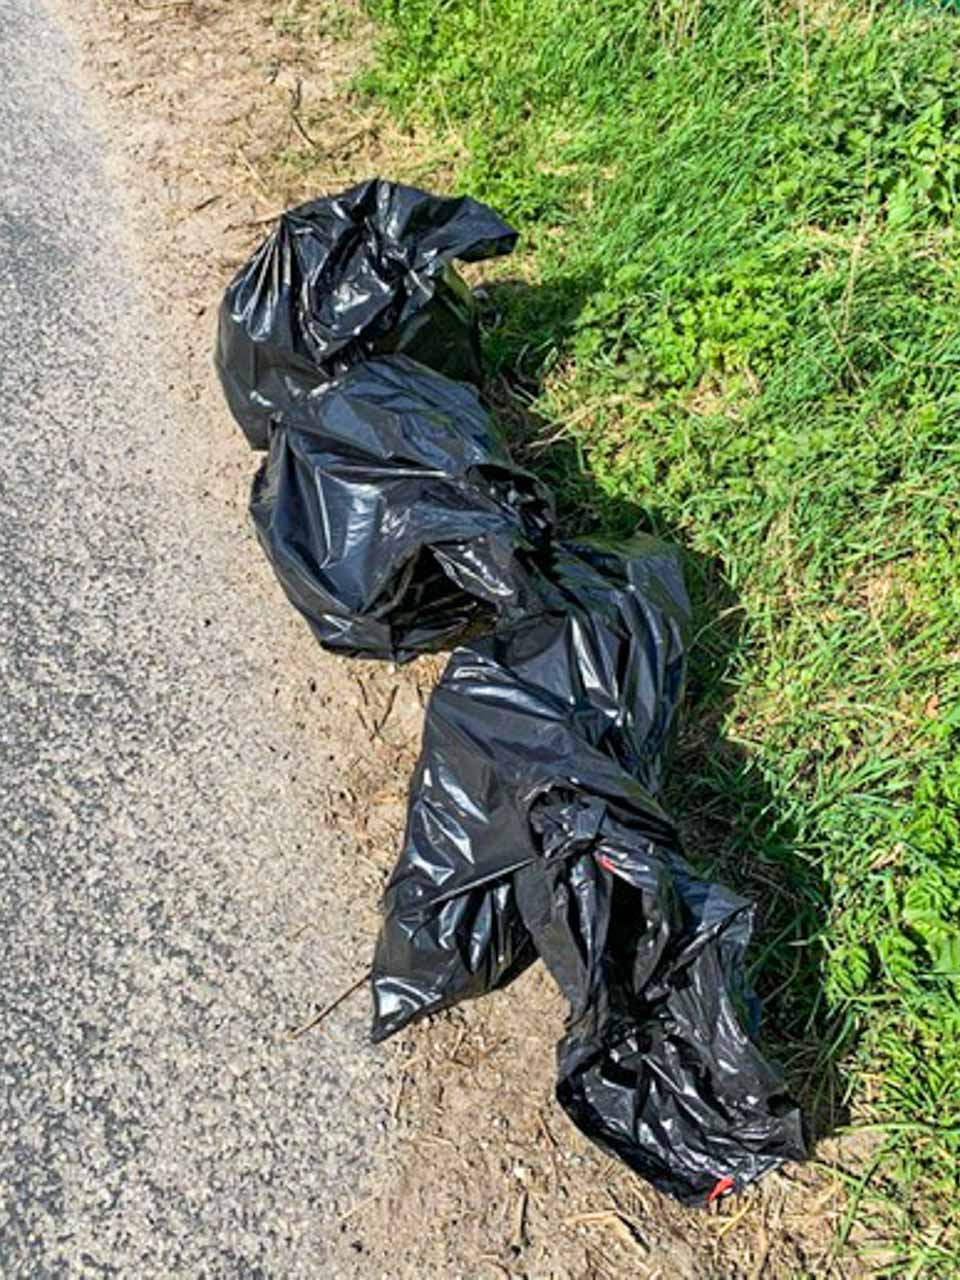 Litter pick 2022: Each group collected multiple bags of rubbish from around Cattistock